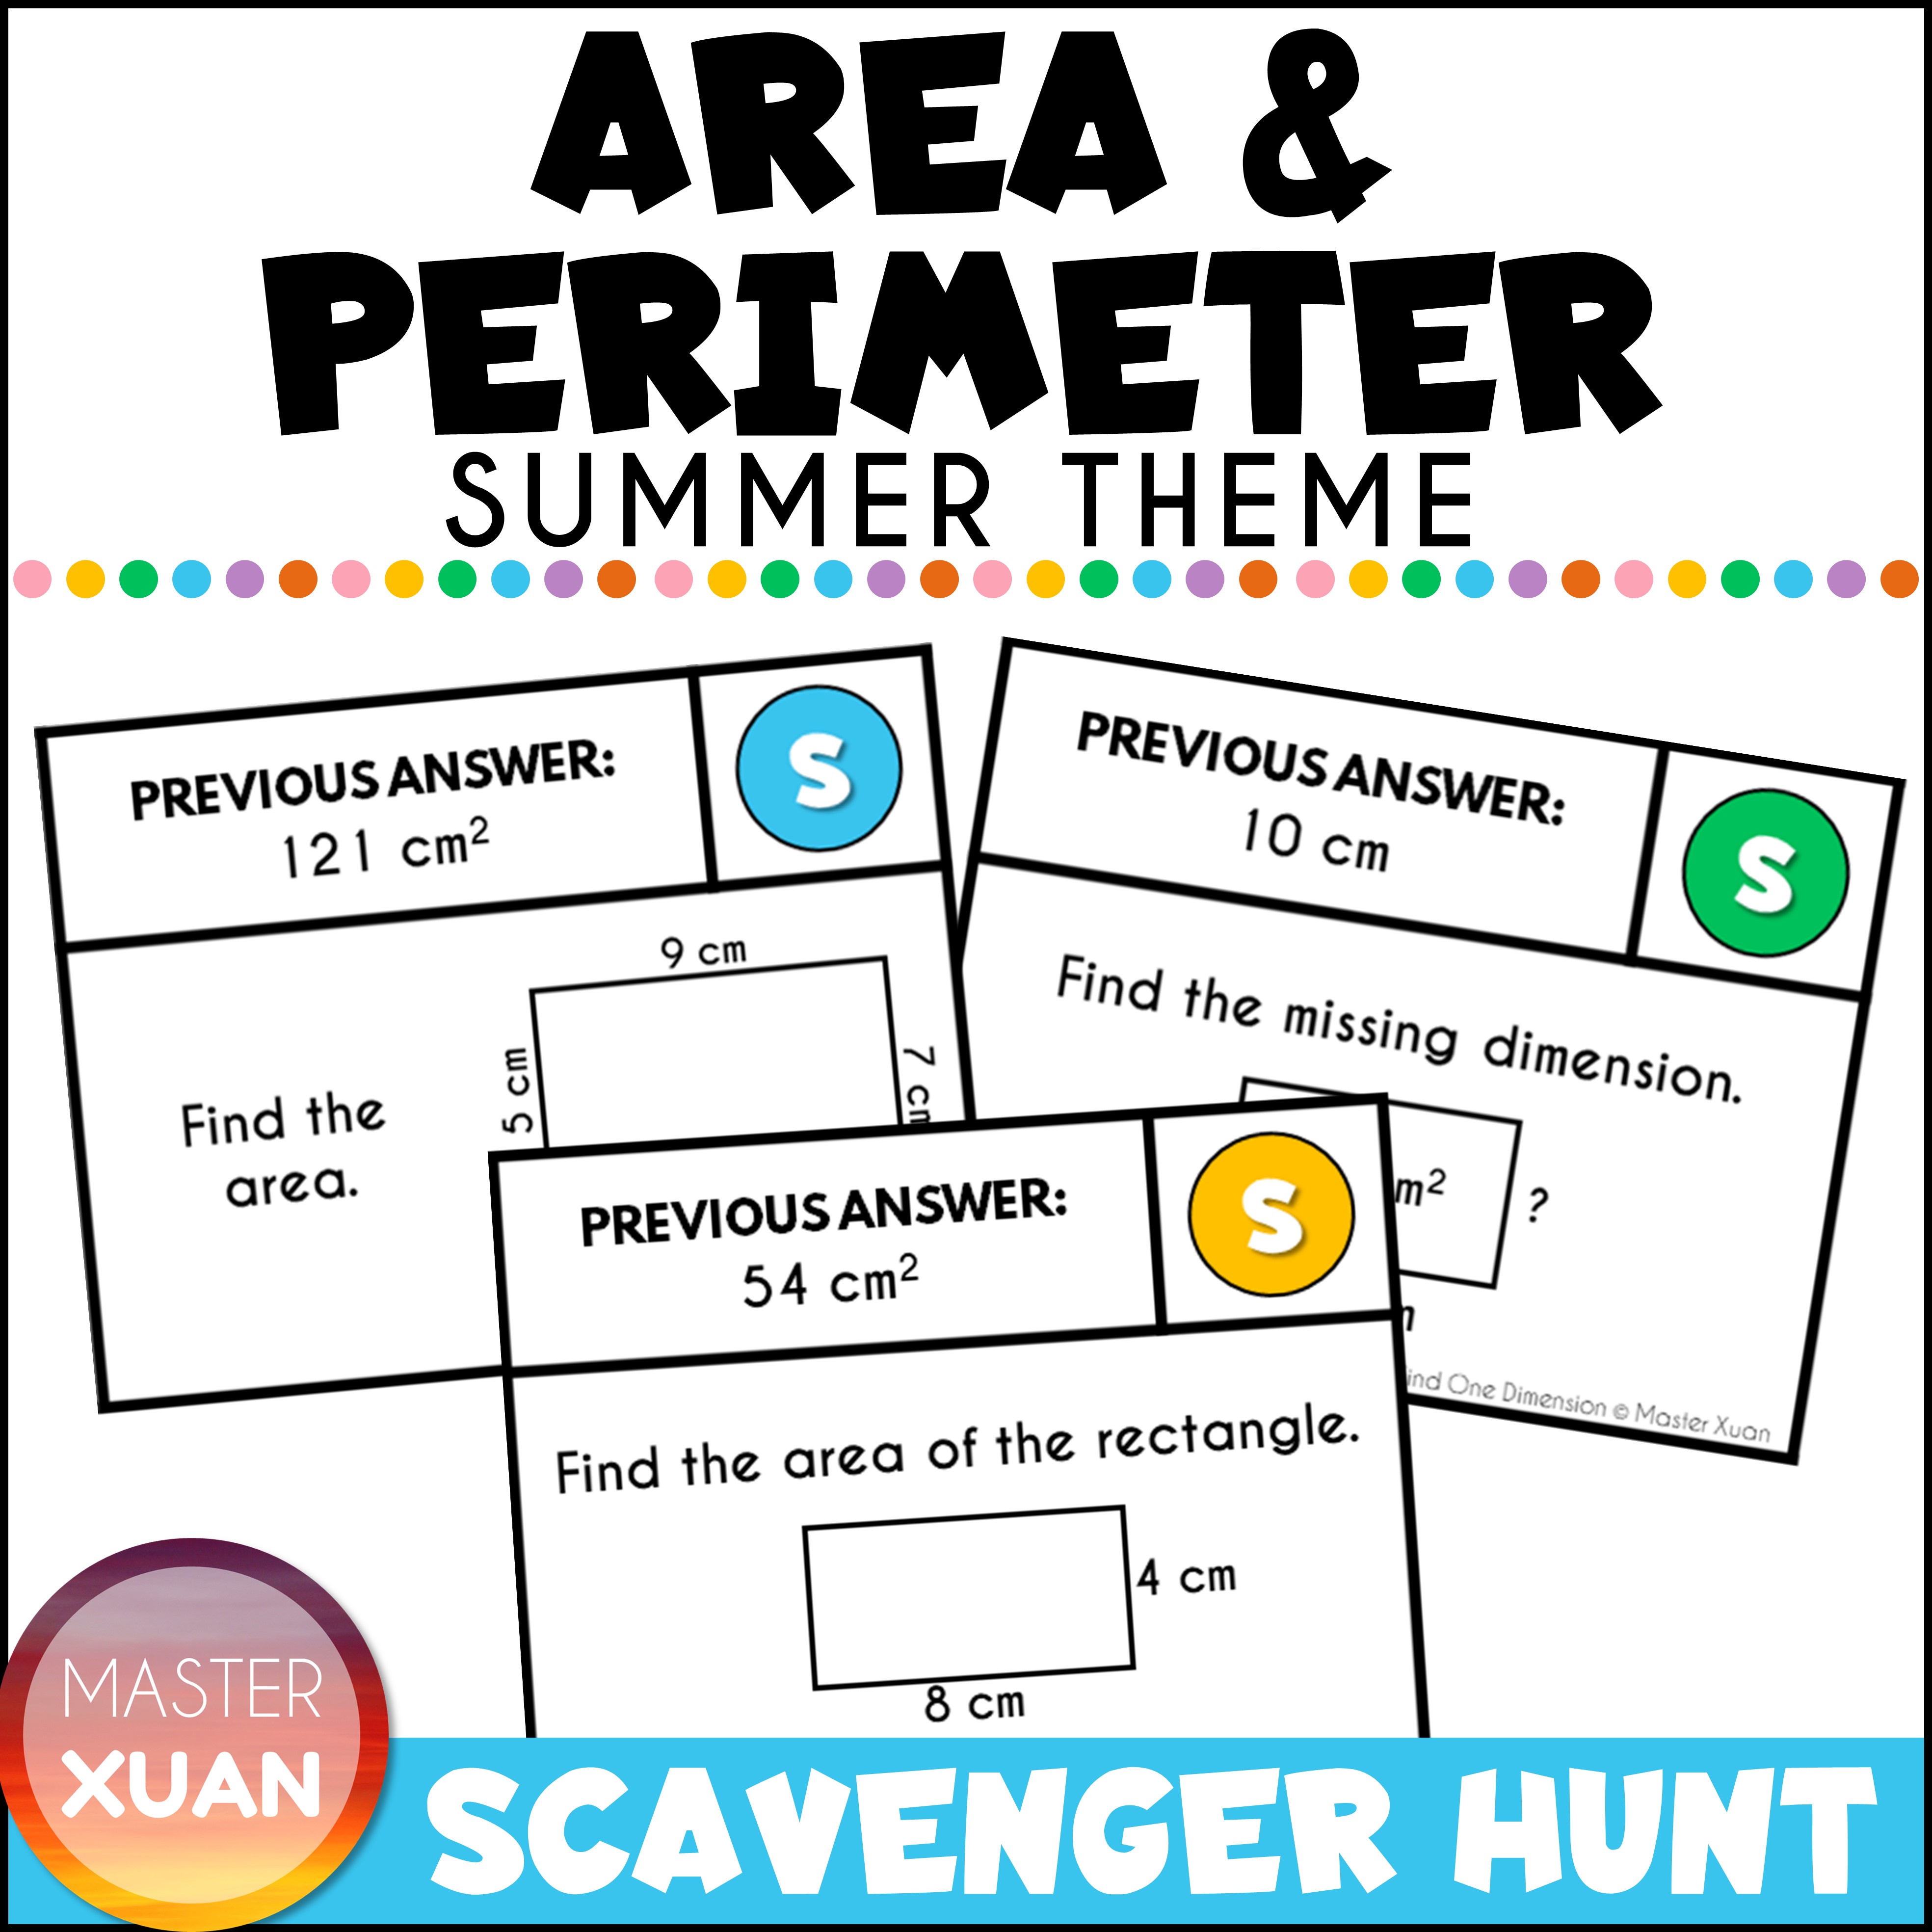 Area and perimeter scavenger hunt is of summer theme.